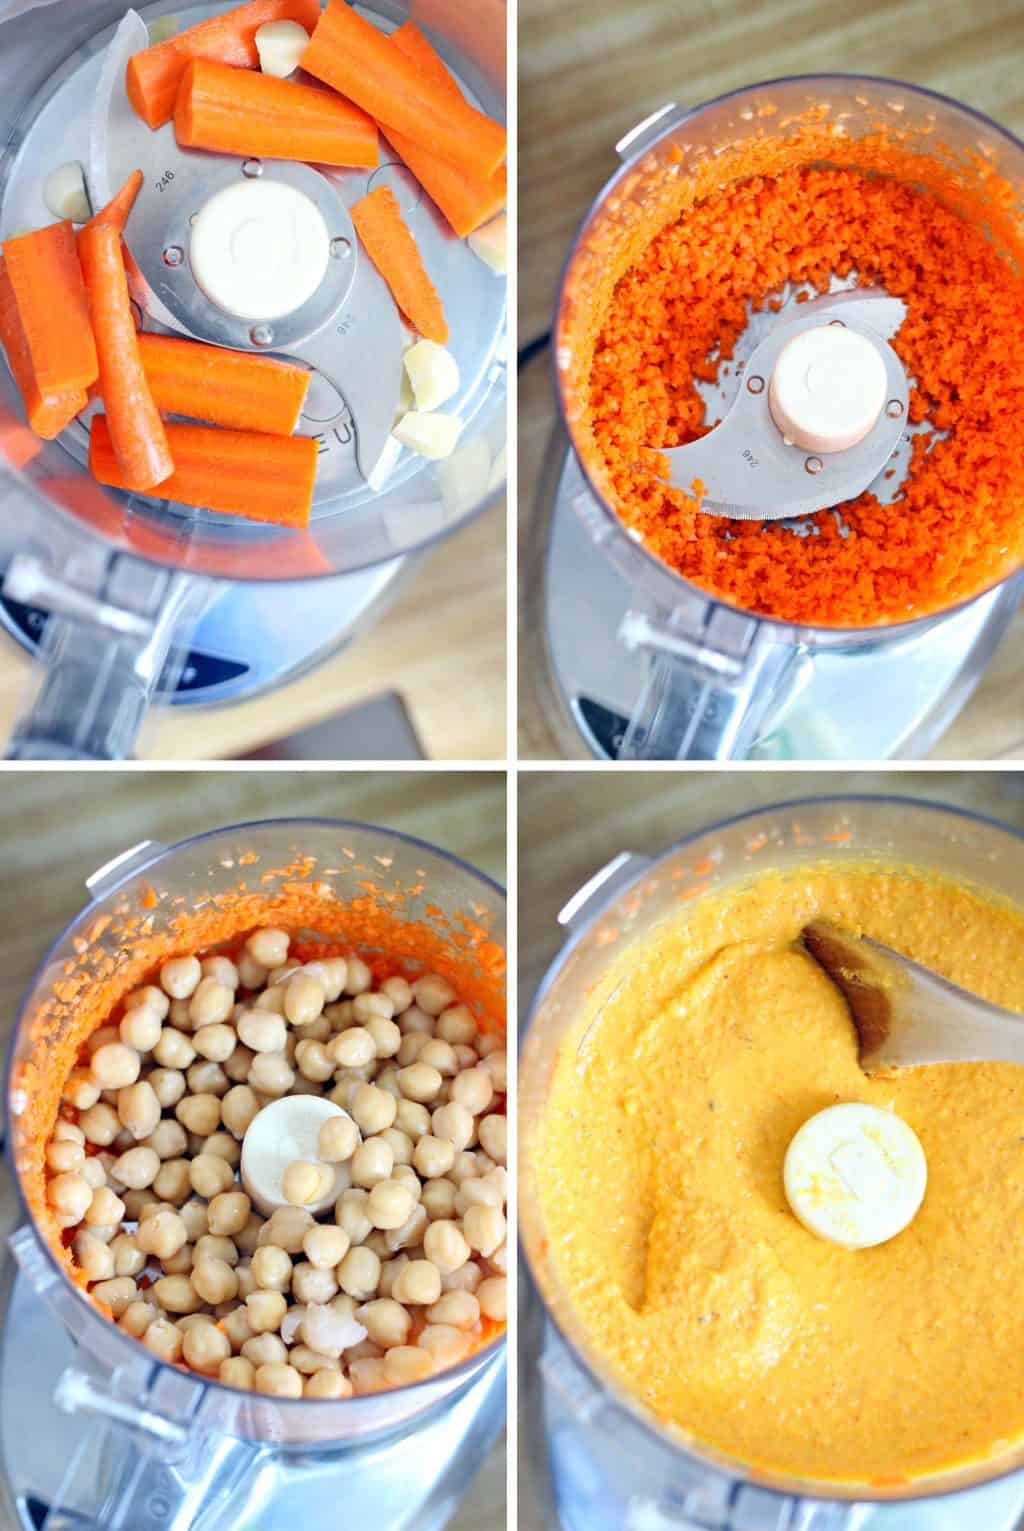 Four photos showing the process of pureeing hummus ingredients in a food processor.